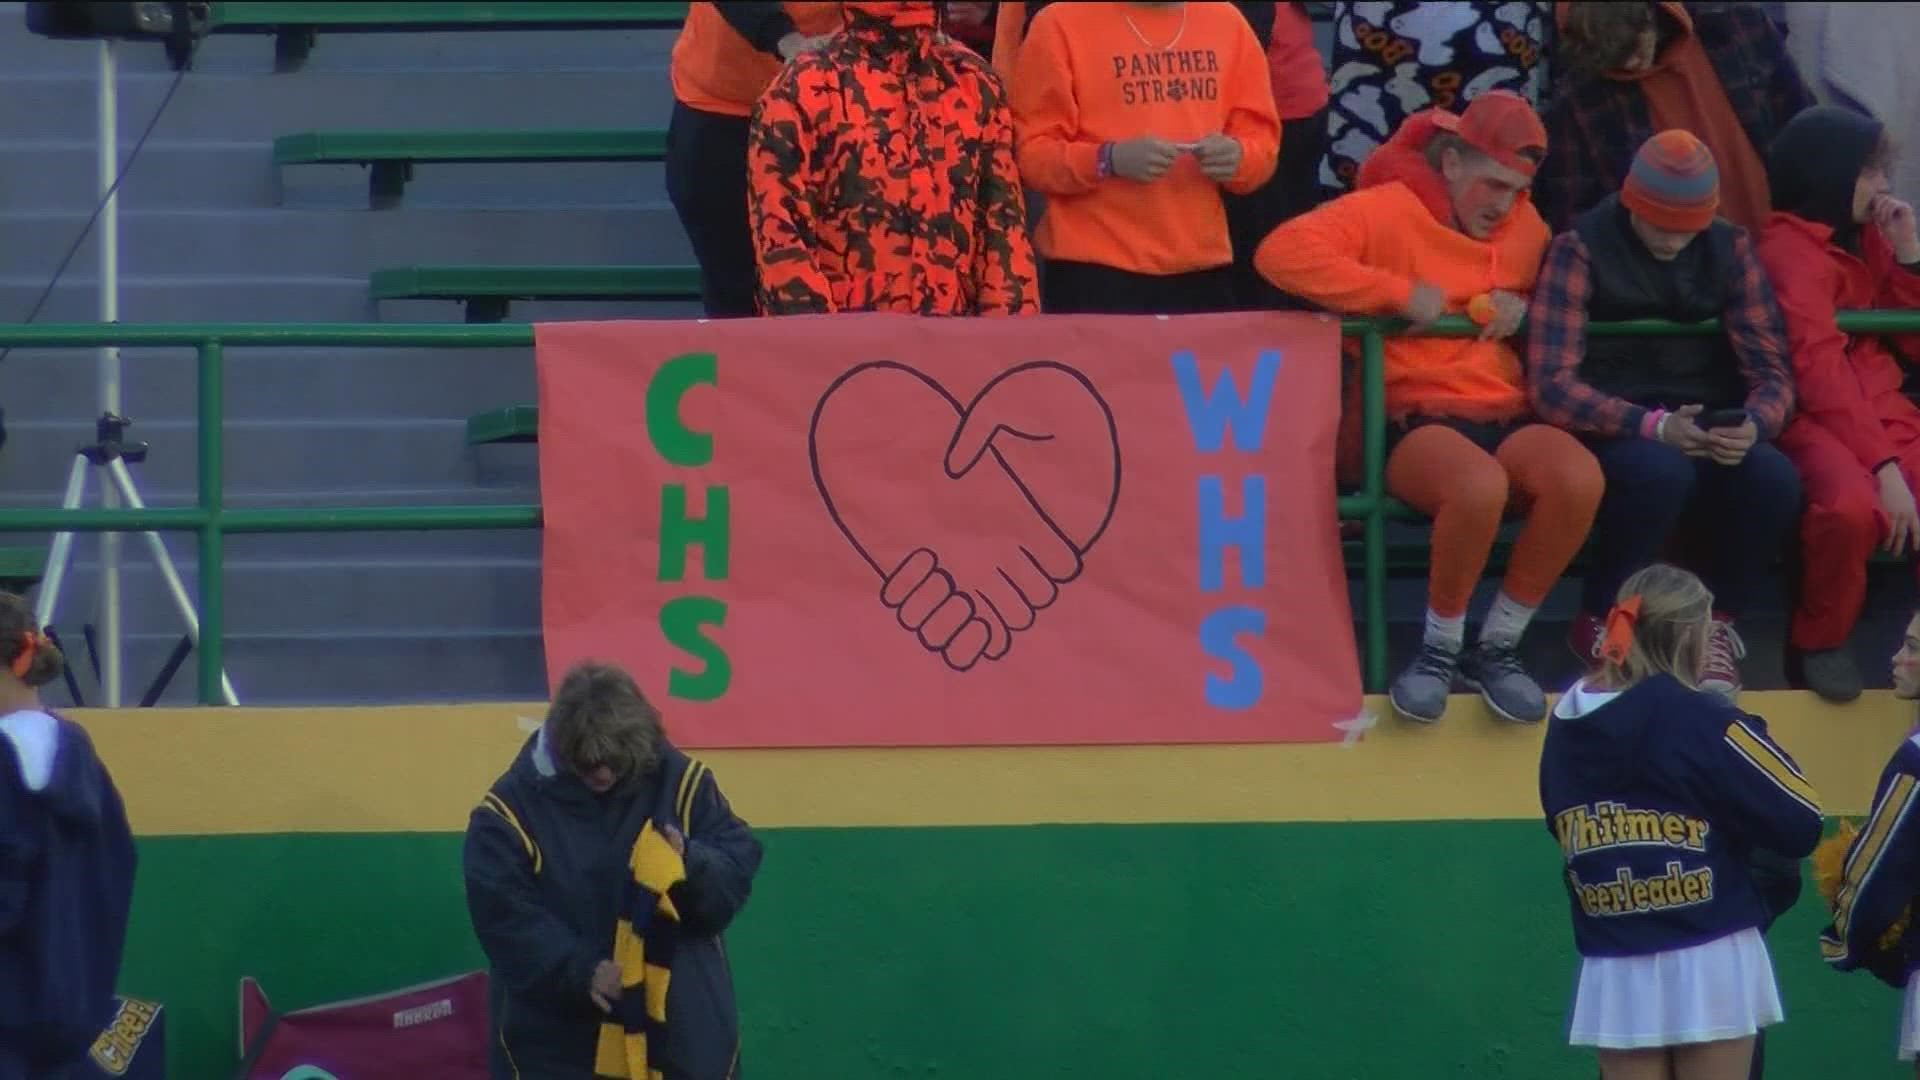 A week after the shooting outside Whitmer High School's football stadium, area high schools wore orange at Friday football games in a unified show of support.